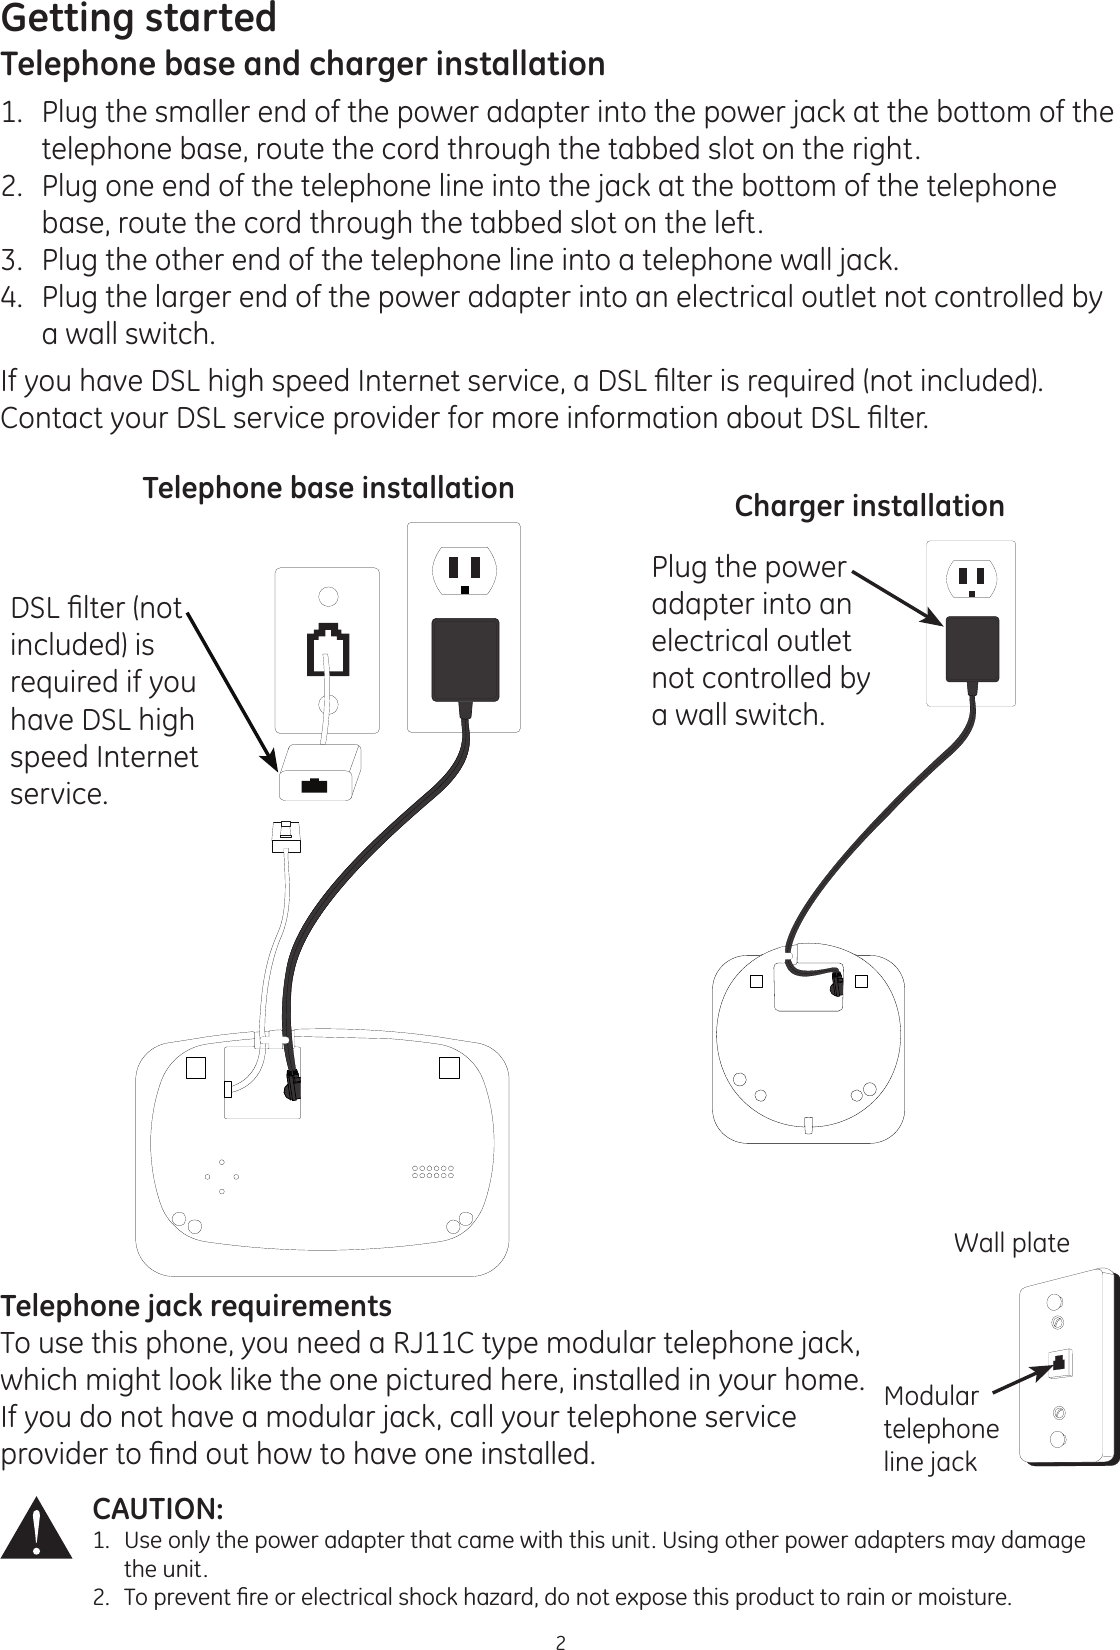 Getting started2CAUTION: 1.  Use only the power adapter that came with this unit. Using other power adapters may damage        the unit. 7RSUHYHQW¿UHRUHOHFWULFDOVKRFNKD]DUGGRQRWH[SRVHWKLVSURGXFWWRUDLQRUPRLVWXUHTelephone base and charger installation1.   Plug the smaller end of the power adapter into the power jack at the bottom of the telephone base, route the cord through the tabbed slot on the right.2.   Plug one end of the telephone line into the jack at the bottom of the telephone base, route the cord through the tabbed slot on the left.3.   Plug the other end of the telephone line into a telephone wall jack.4.   Plug the larger end of the power adapter into an electrical outlet not controlled by a wall switch.,I\RXKDYH&apos;6/KLJKVSHHG,QWHUQHWVHUYLFHD&apos;6/¿OWHULVUHTXLUHGQRWLQFOXGHG&amp;RQWDFW\RXU&apos;6/VHUYLFHSURYLGHUIRUPRUHLQIRUPDWLRQDERXW&apos;6/¿OWHU&apos;6/¿OWHUQRWincluded) is required if you have DSL high speed Internet service.Telephone base installation Charger installationPlug the power adapter into an electrical outlet not controlled by a wall switch. Telephone jack requirementsTo use this phone, you need a RJ11C type modular telephone jack, which might look like the one pictured here, installed in your home. If you do not have a modular jack, call your telephone service SURYLGHUWR¿QGRXWKRZWRKDYHRQHLQVWDOOHGWall plateModular telephone line jack